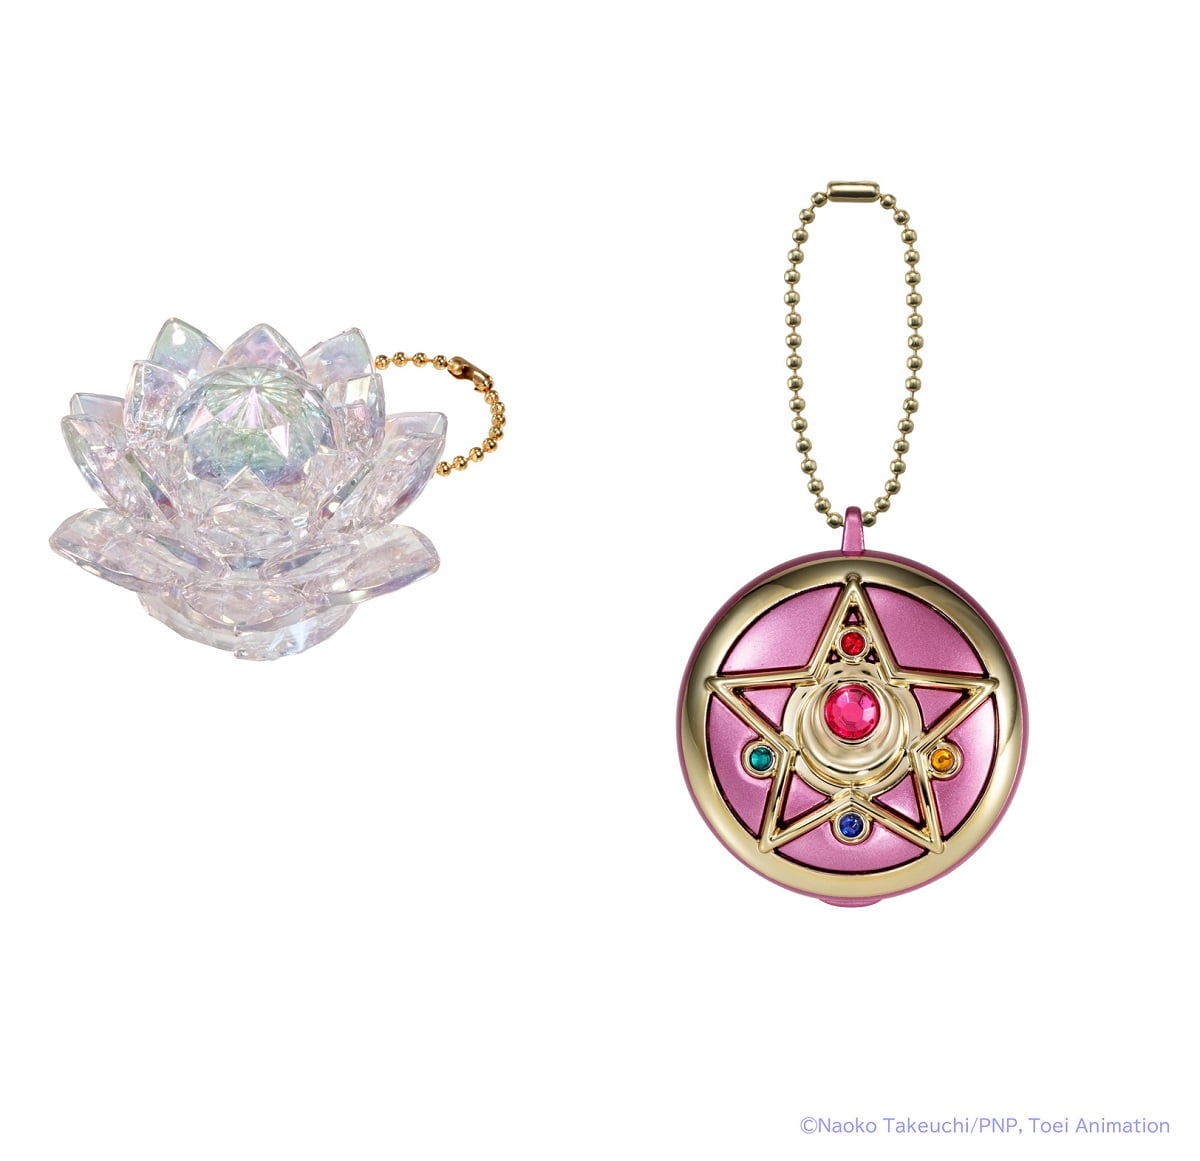 Sailor Moon Open Bezel Charms for Crafting, Metal Anime Charms for Keychains  and Jewelry 